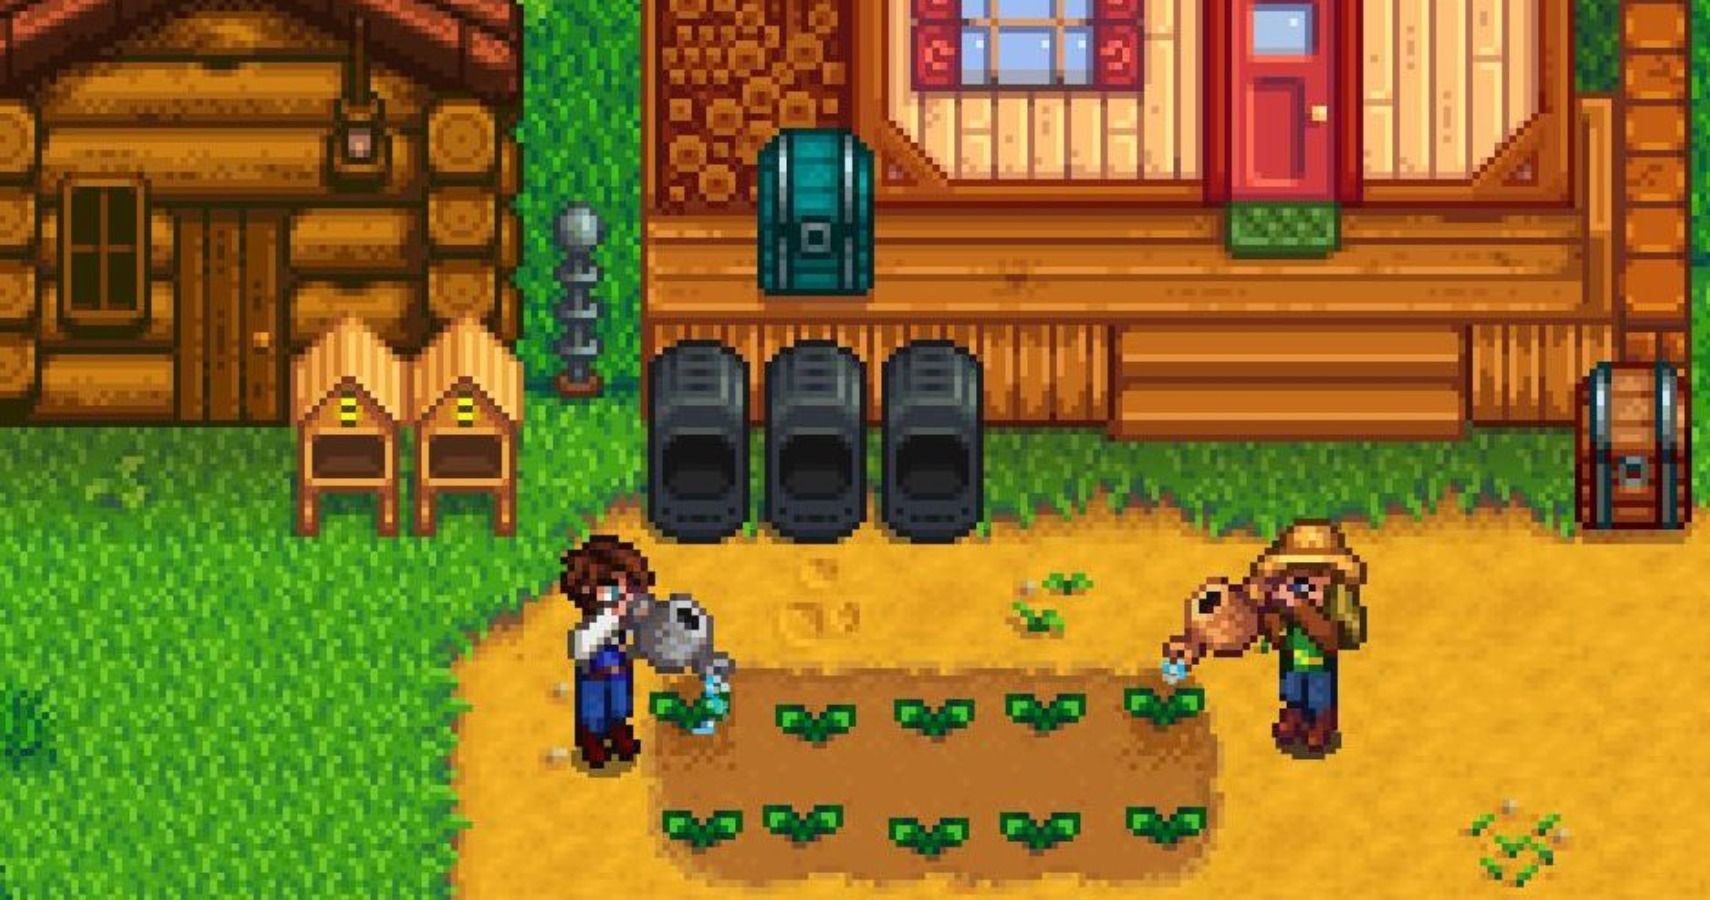 How to Play Stardew Valley Multiplayer on All Platforms